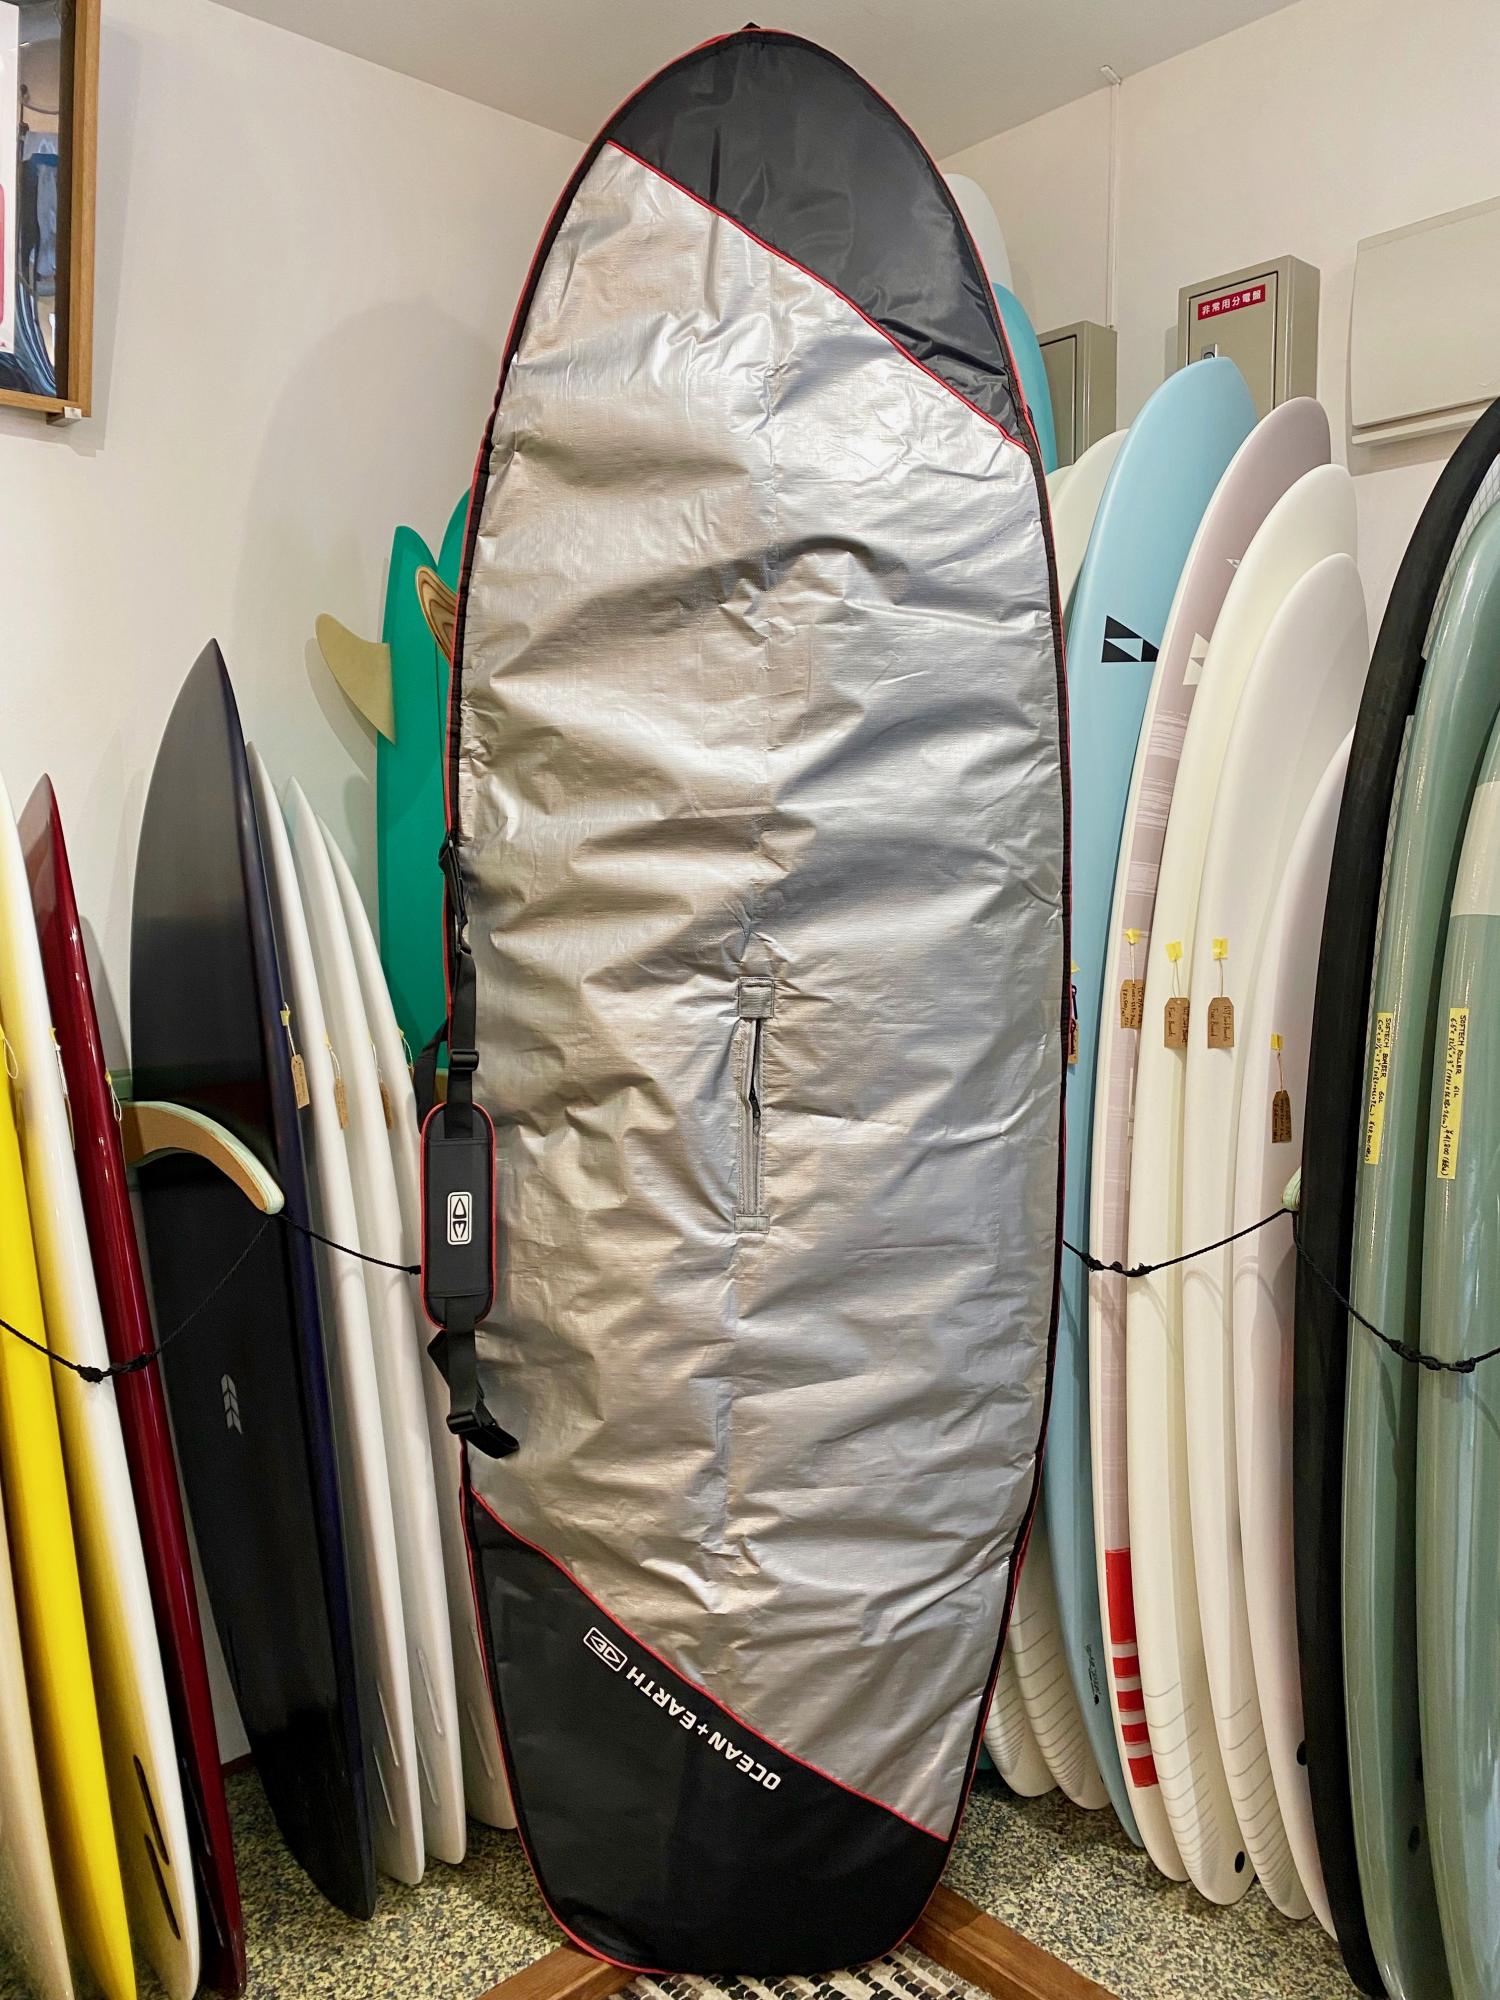 "Hard case for lightweight SUP" of UV-resistant coated fabric